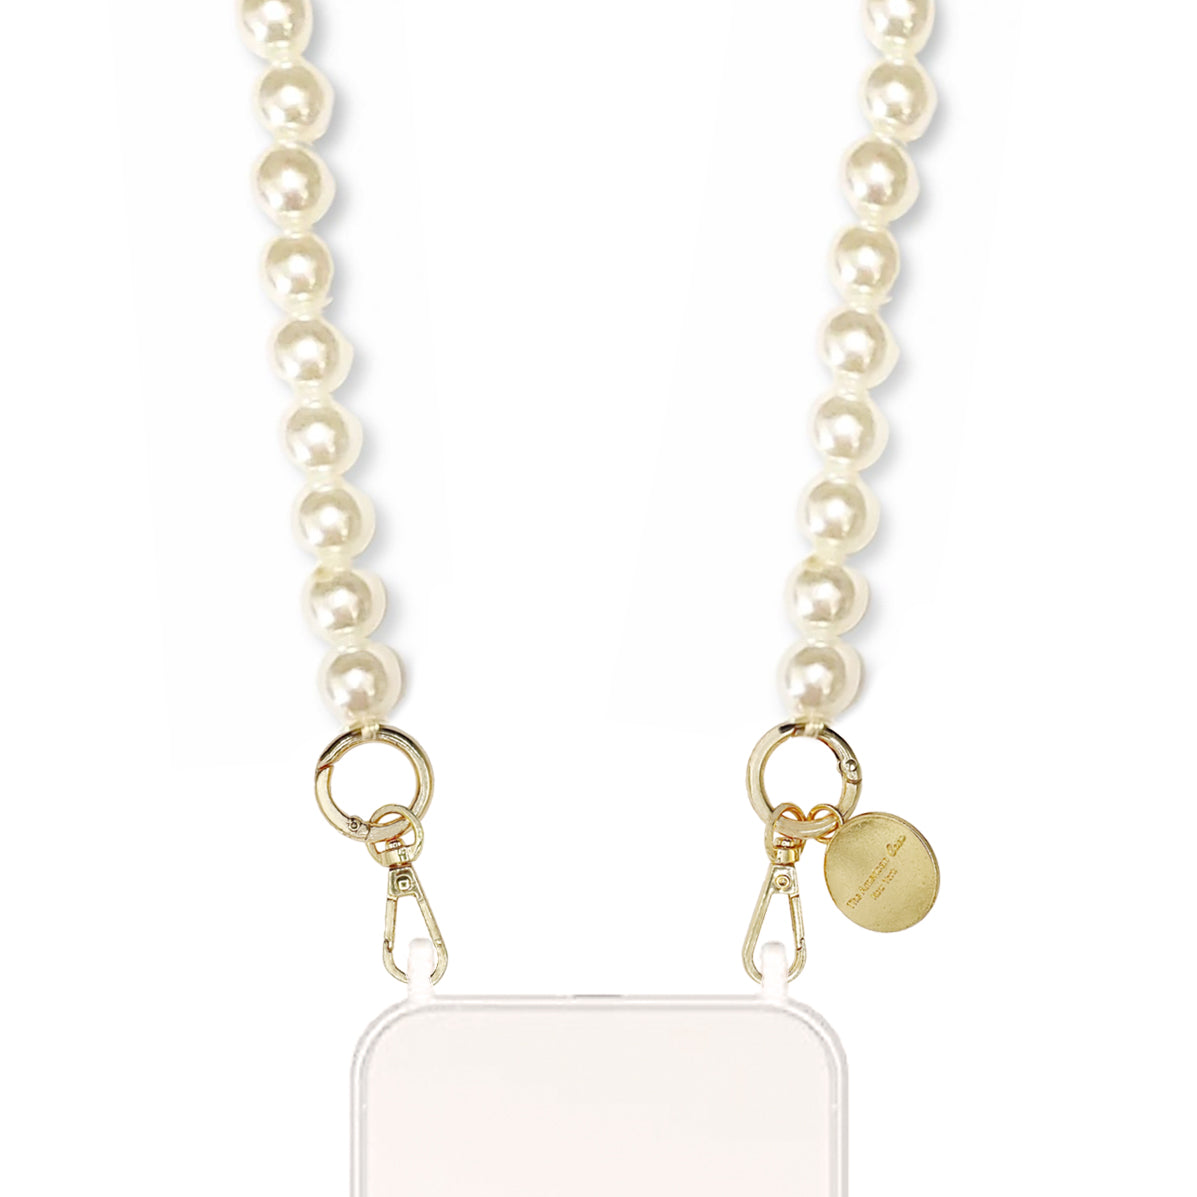 Emily - White Pearl Chain with Gold Carabiners